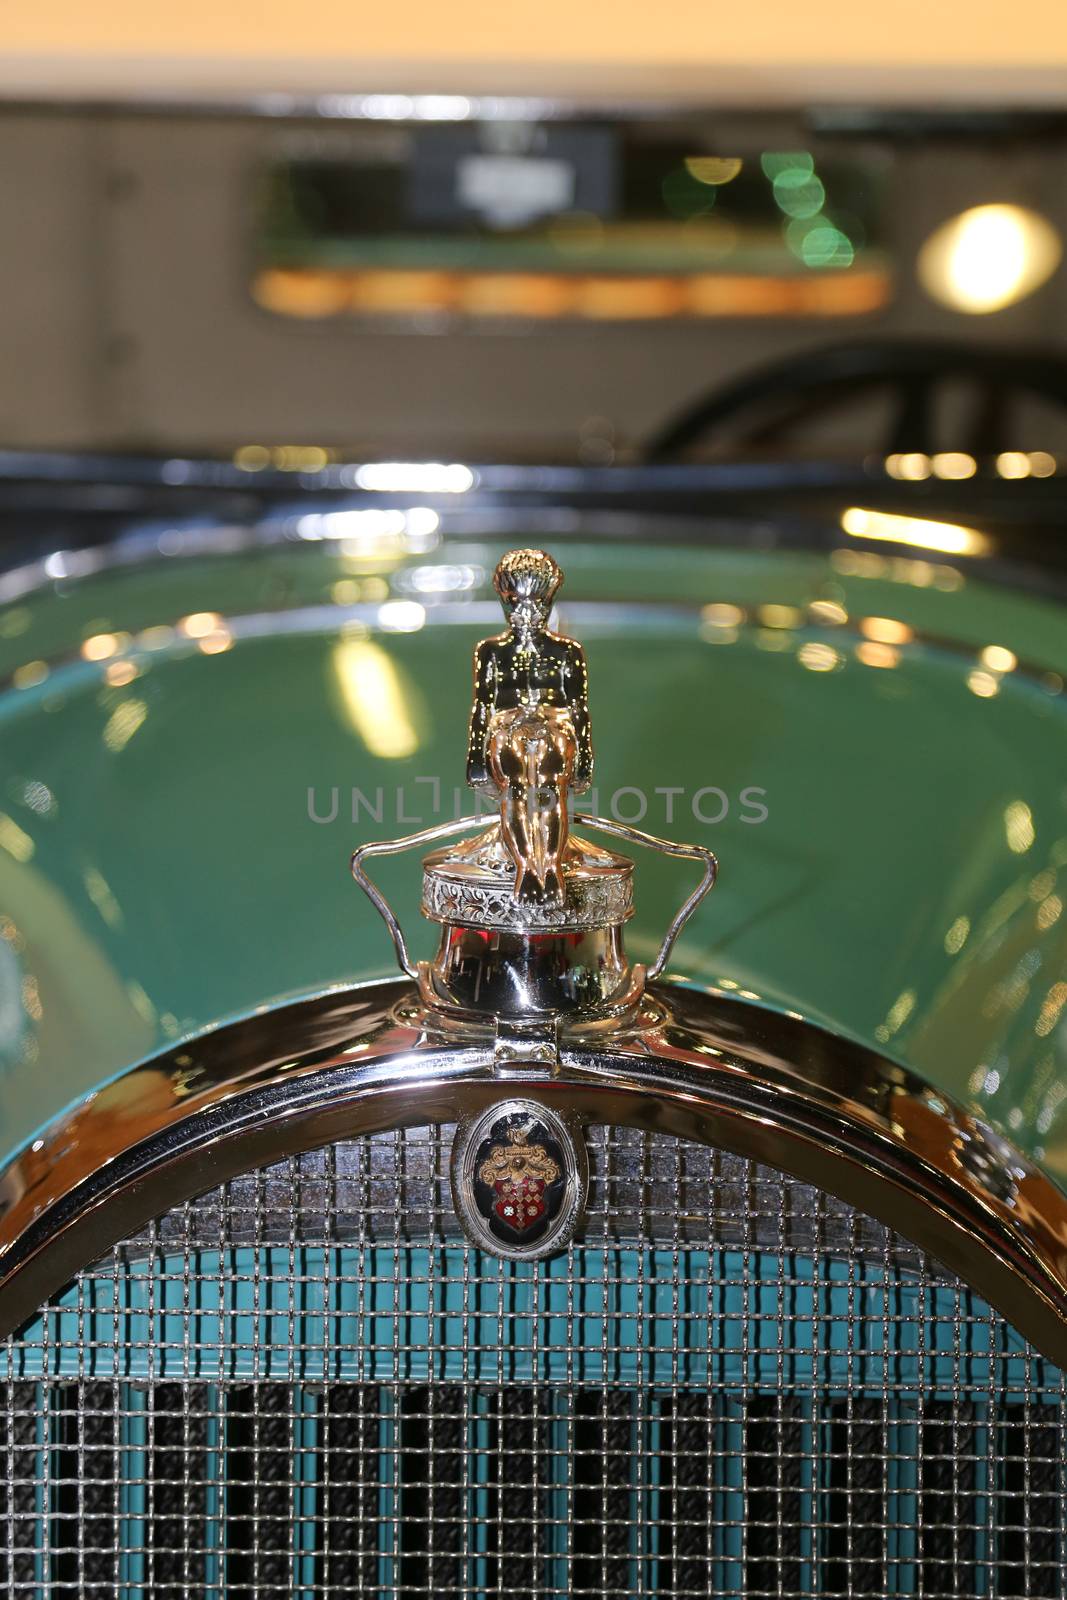 ISTANBUL, TURKEY - SEPTEMBER 12, 2015: An Antique car in Used Cars For Sale Fair in CNX Expo